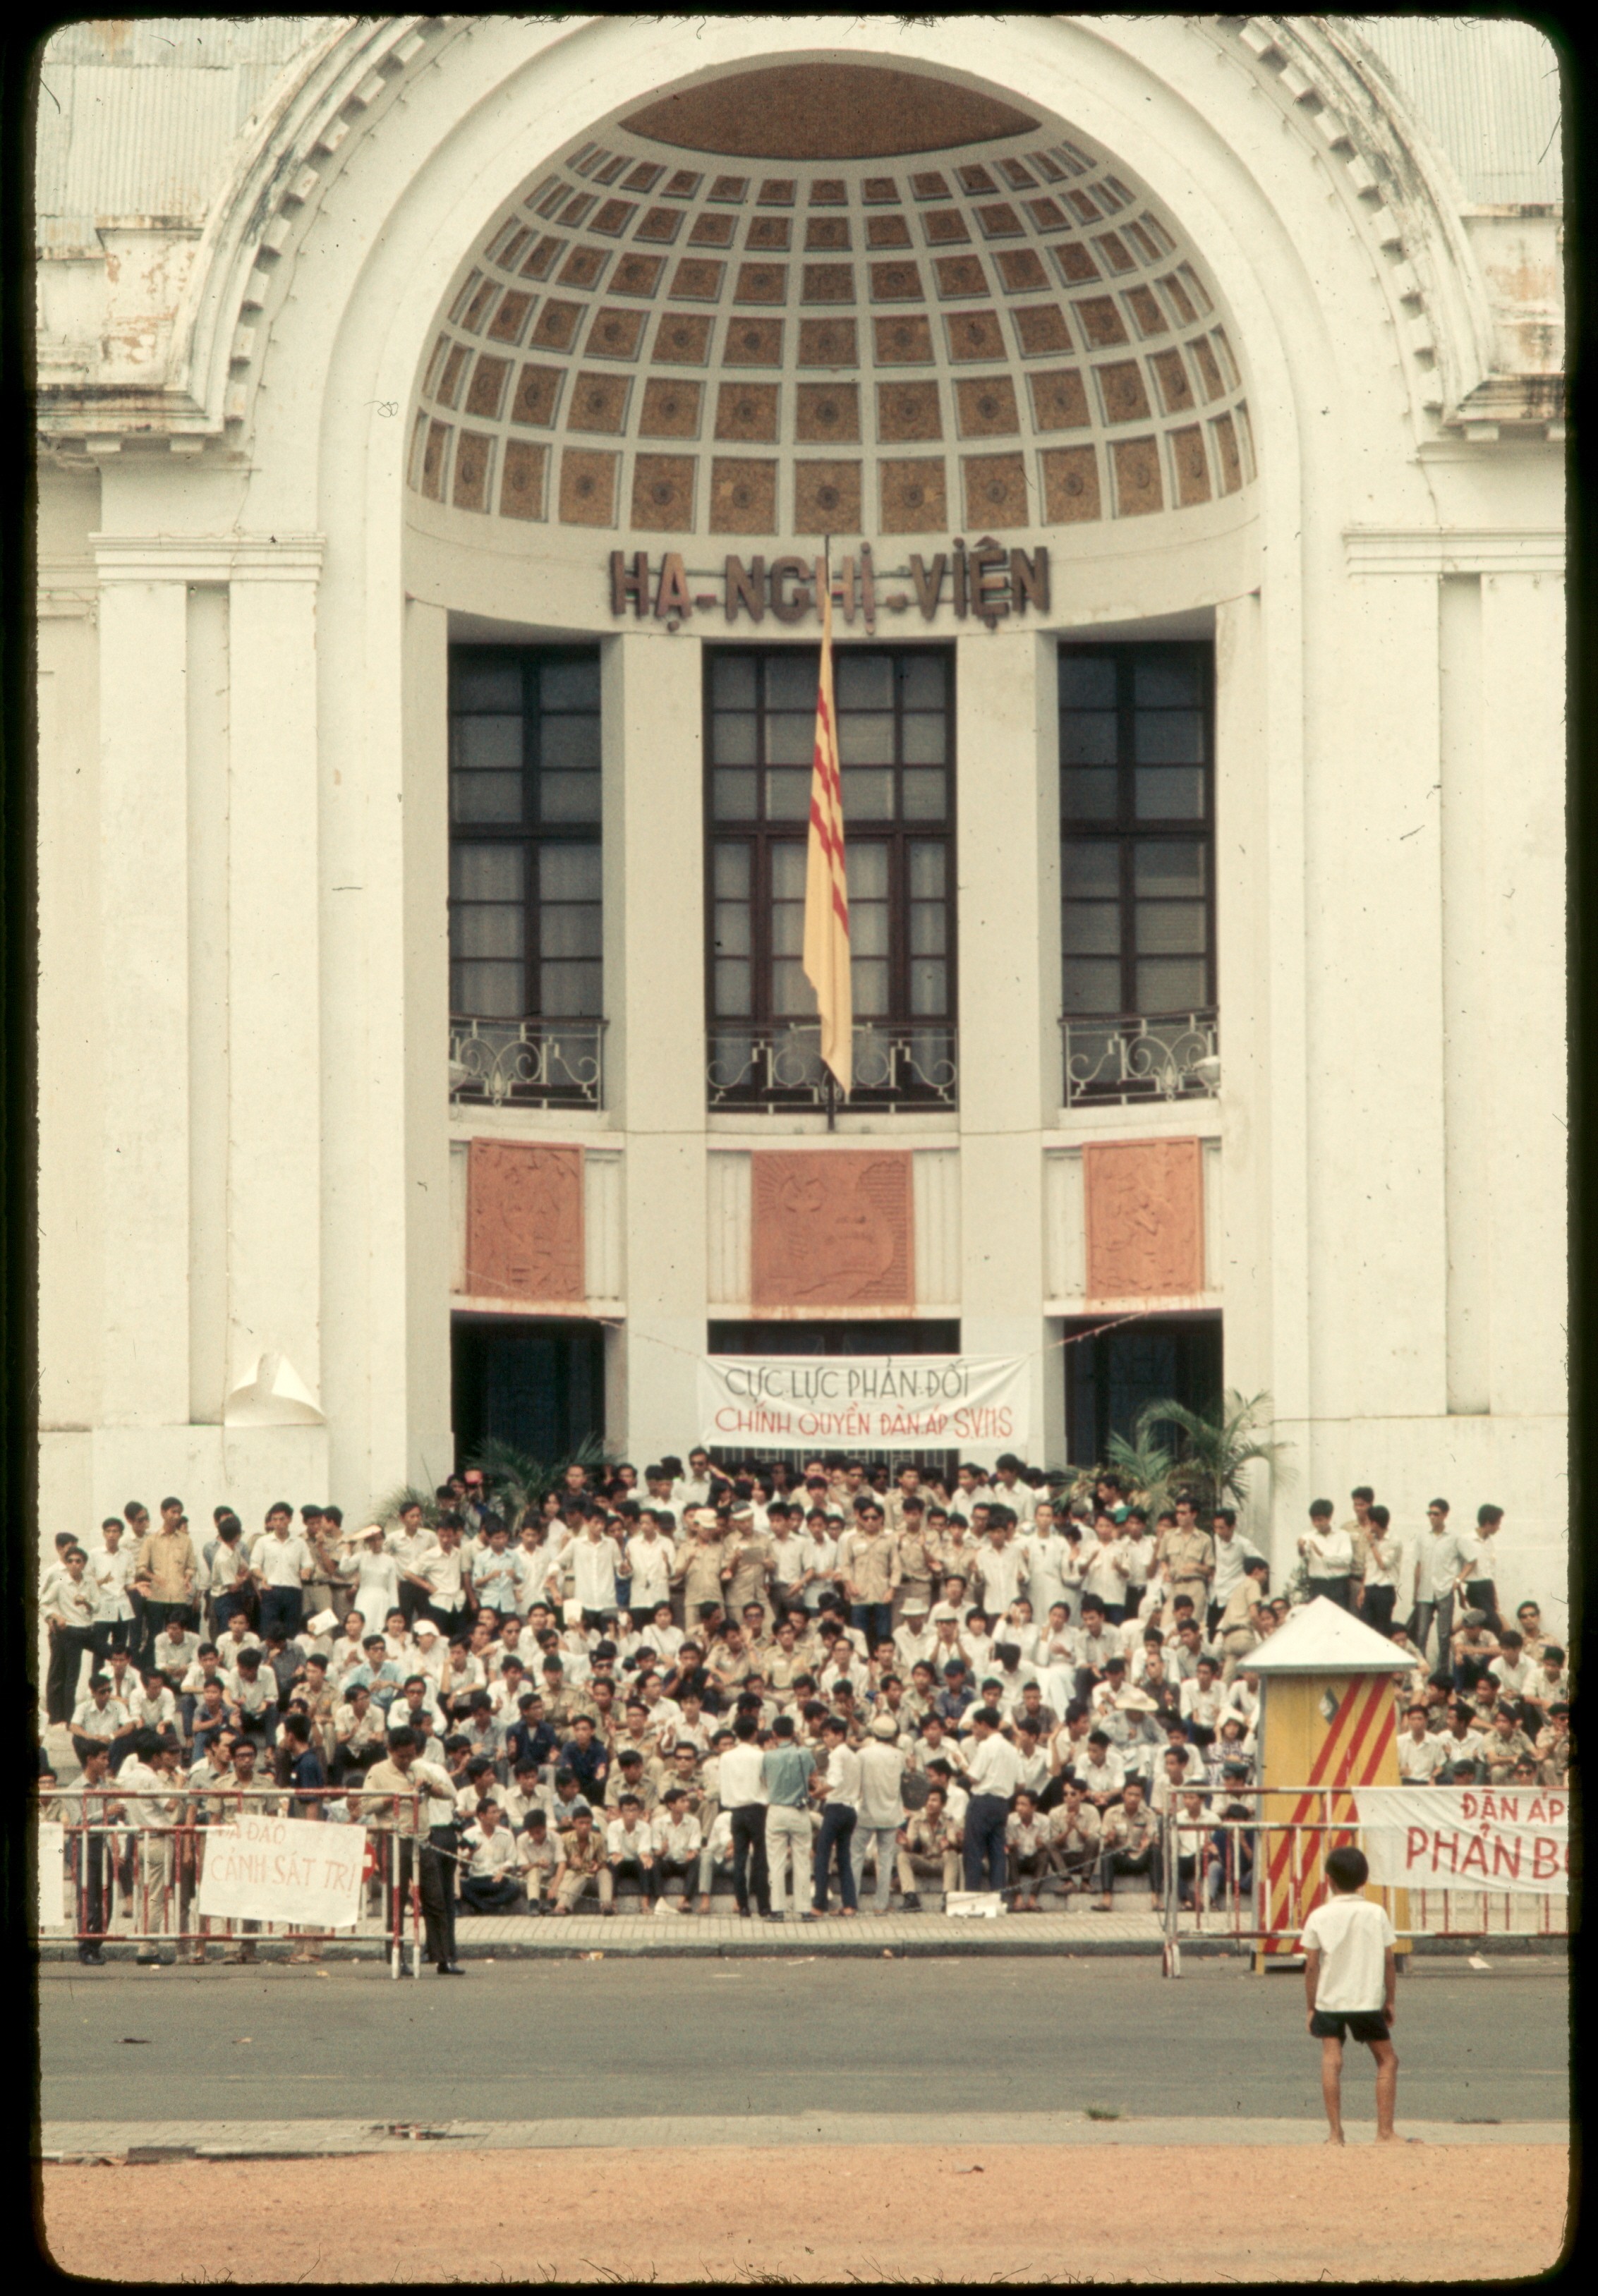 ss 037 1970 05 02 protest at national assembly opera house that i closed saigon with